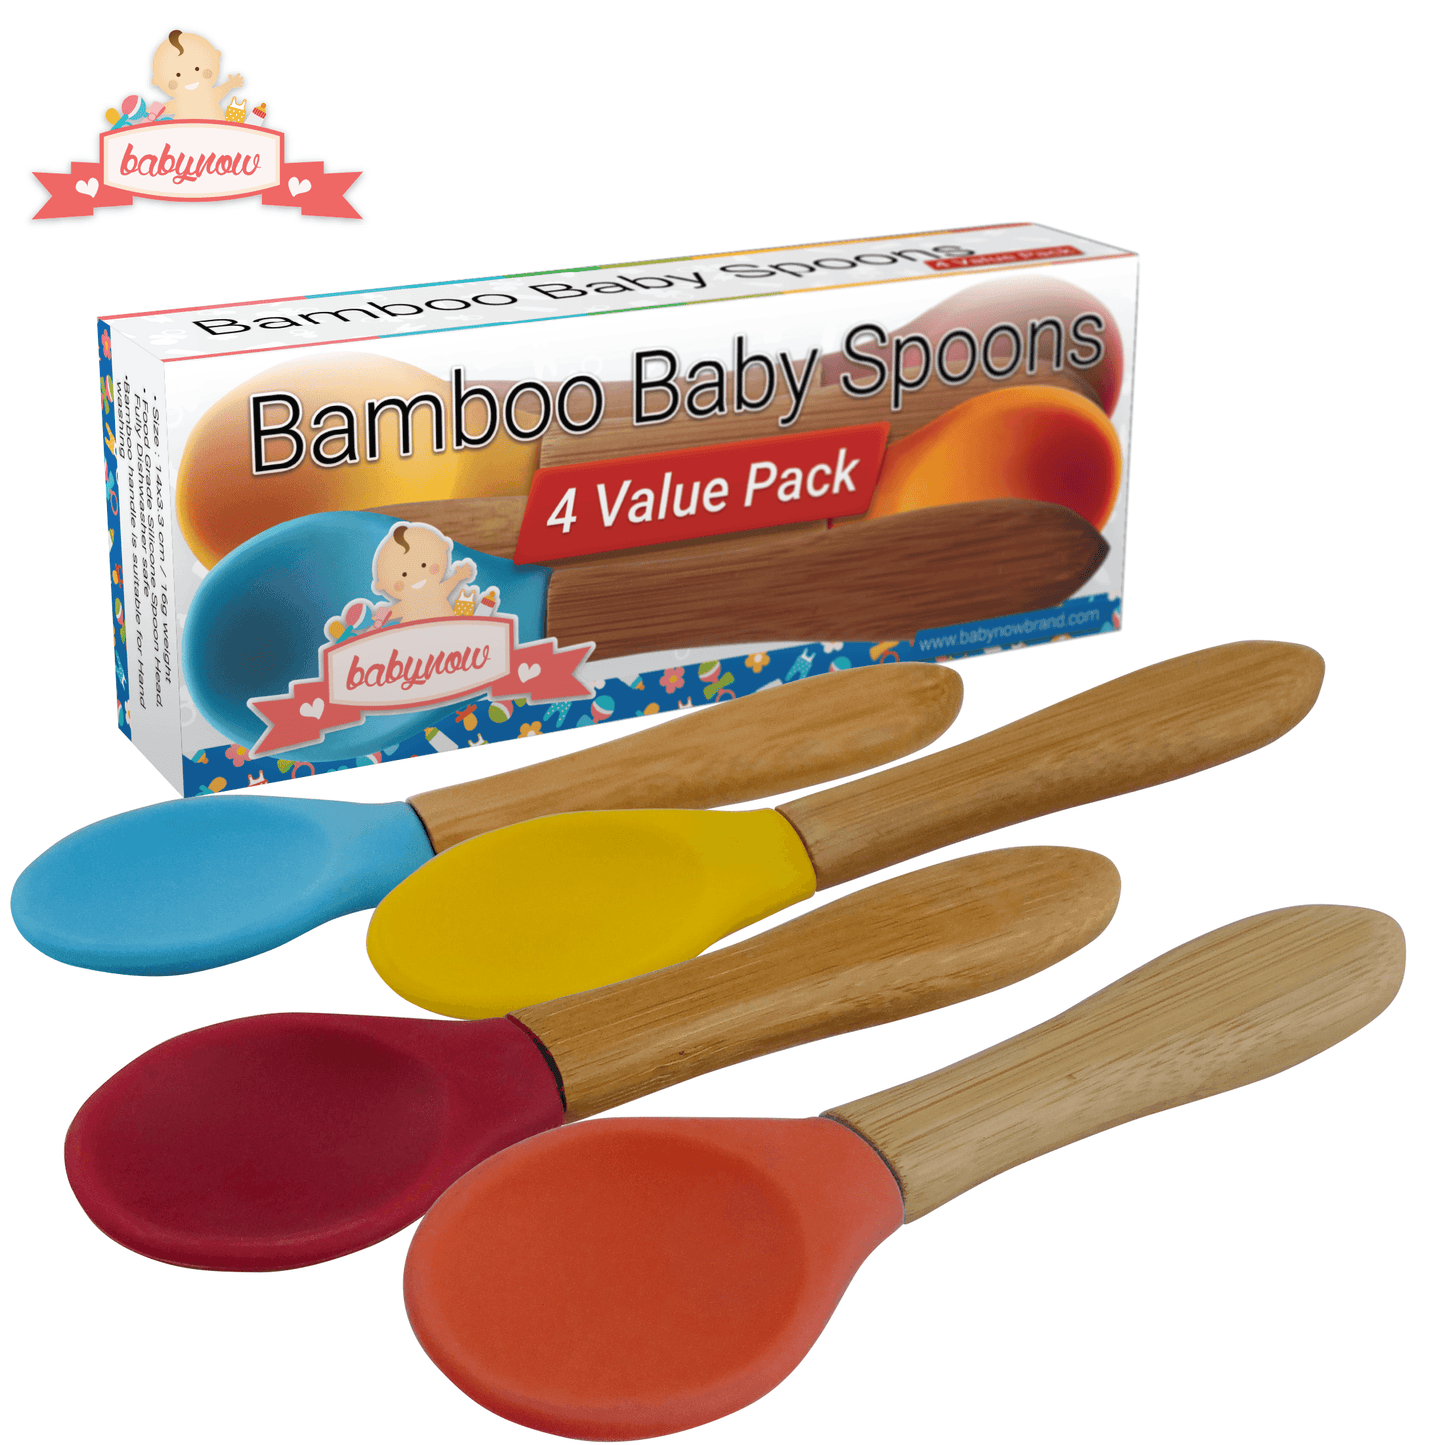 BABY Feeding Spoons 4 PACK Bamboo Weaning Spoon with Silicone Tip BPA Free